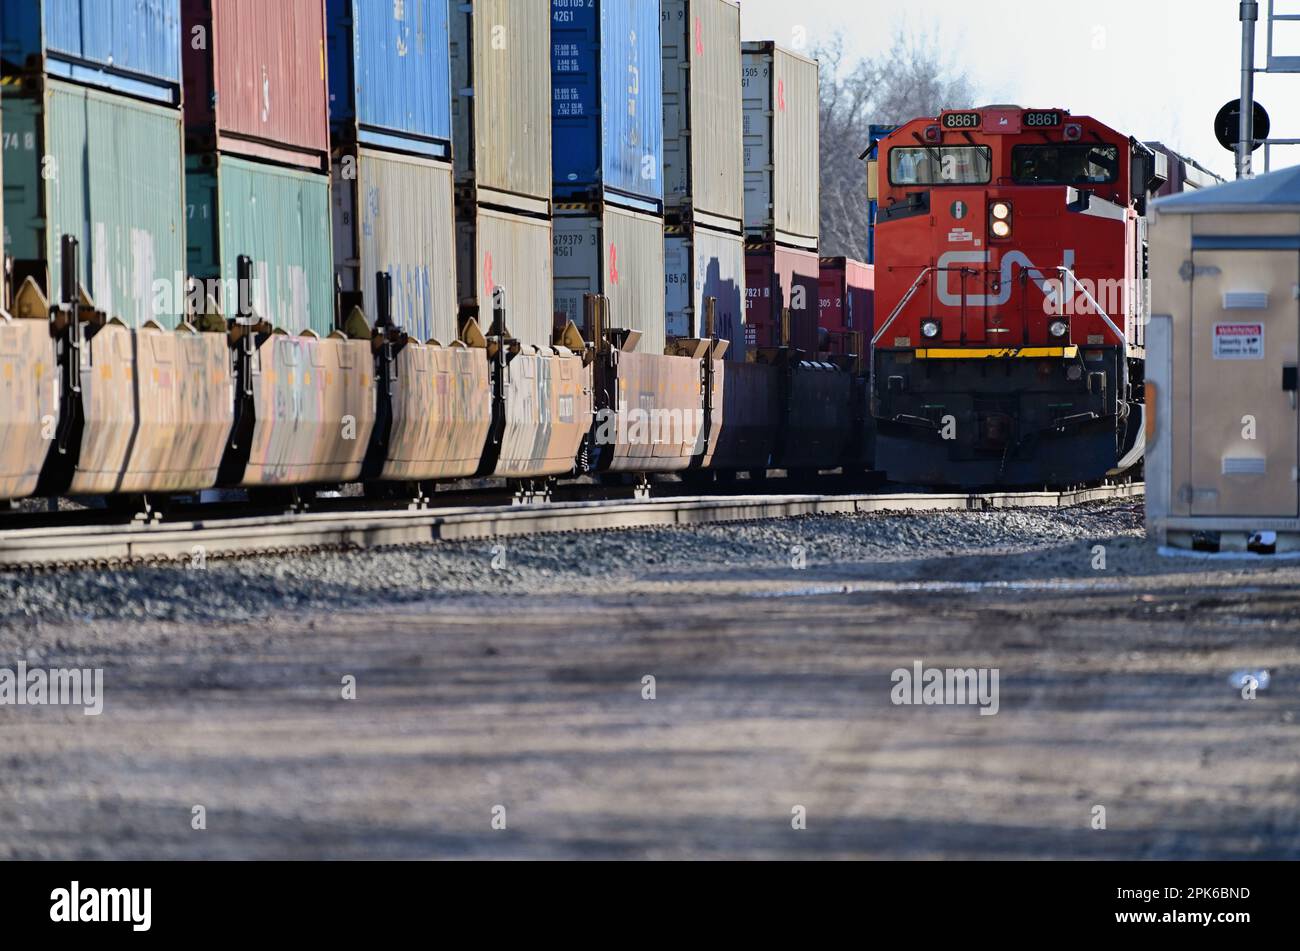 Dundee, Illinois, USA. A Canadian National Railway intermodal freight train passing another CN freight waiting on a siding in rural Illinois. Stock Photo